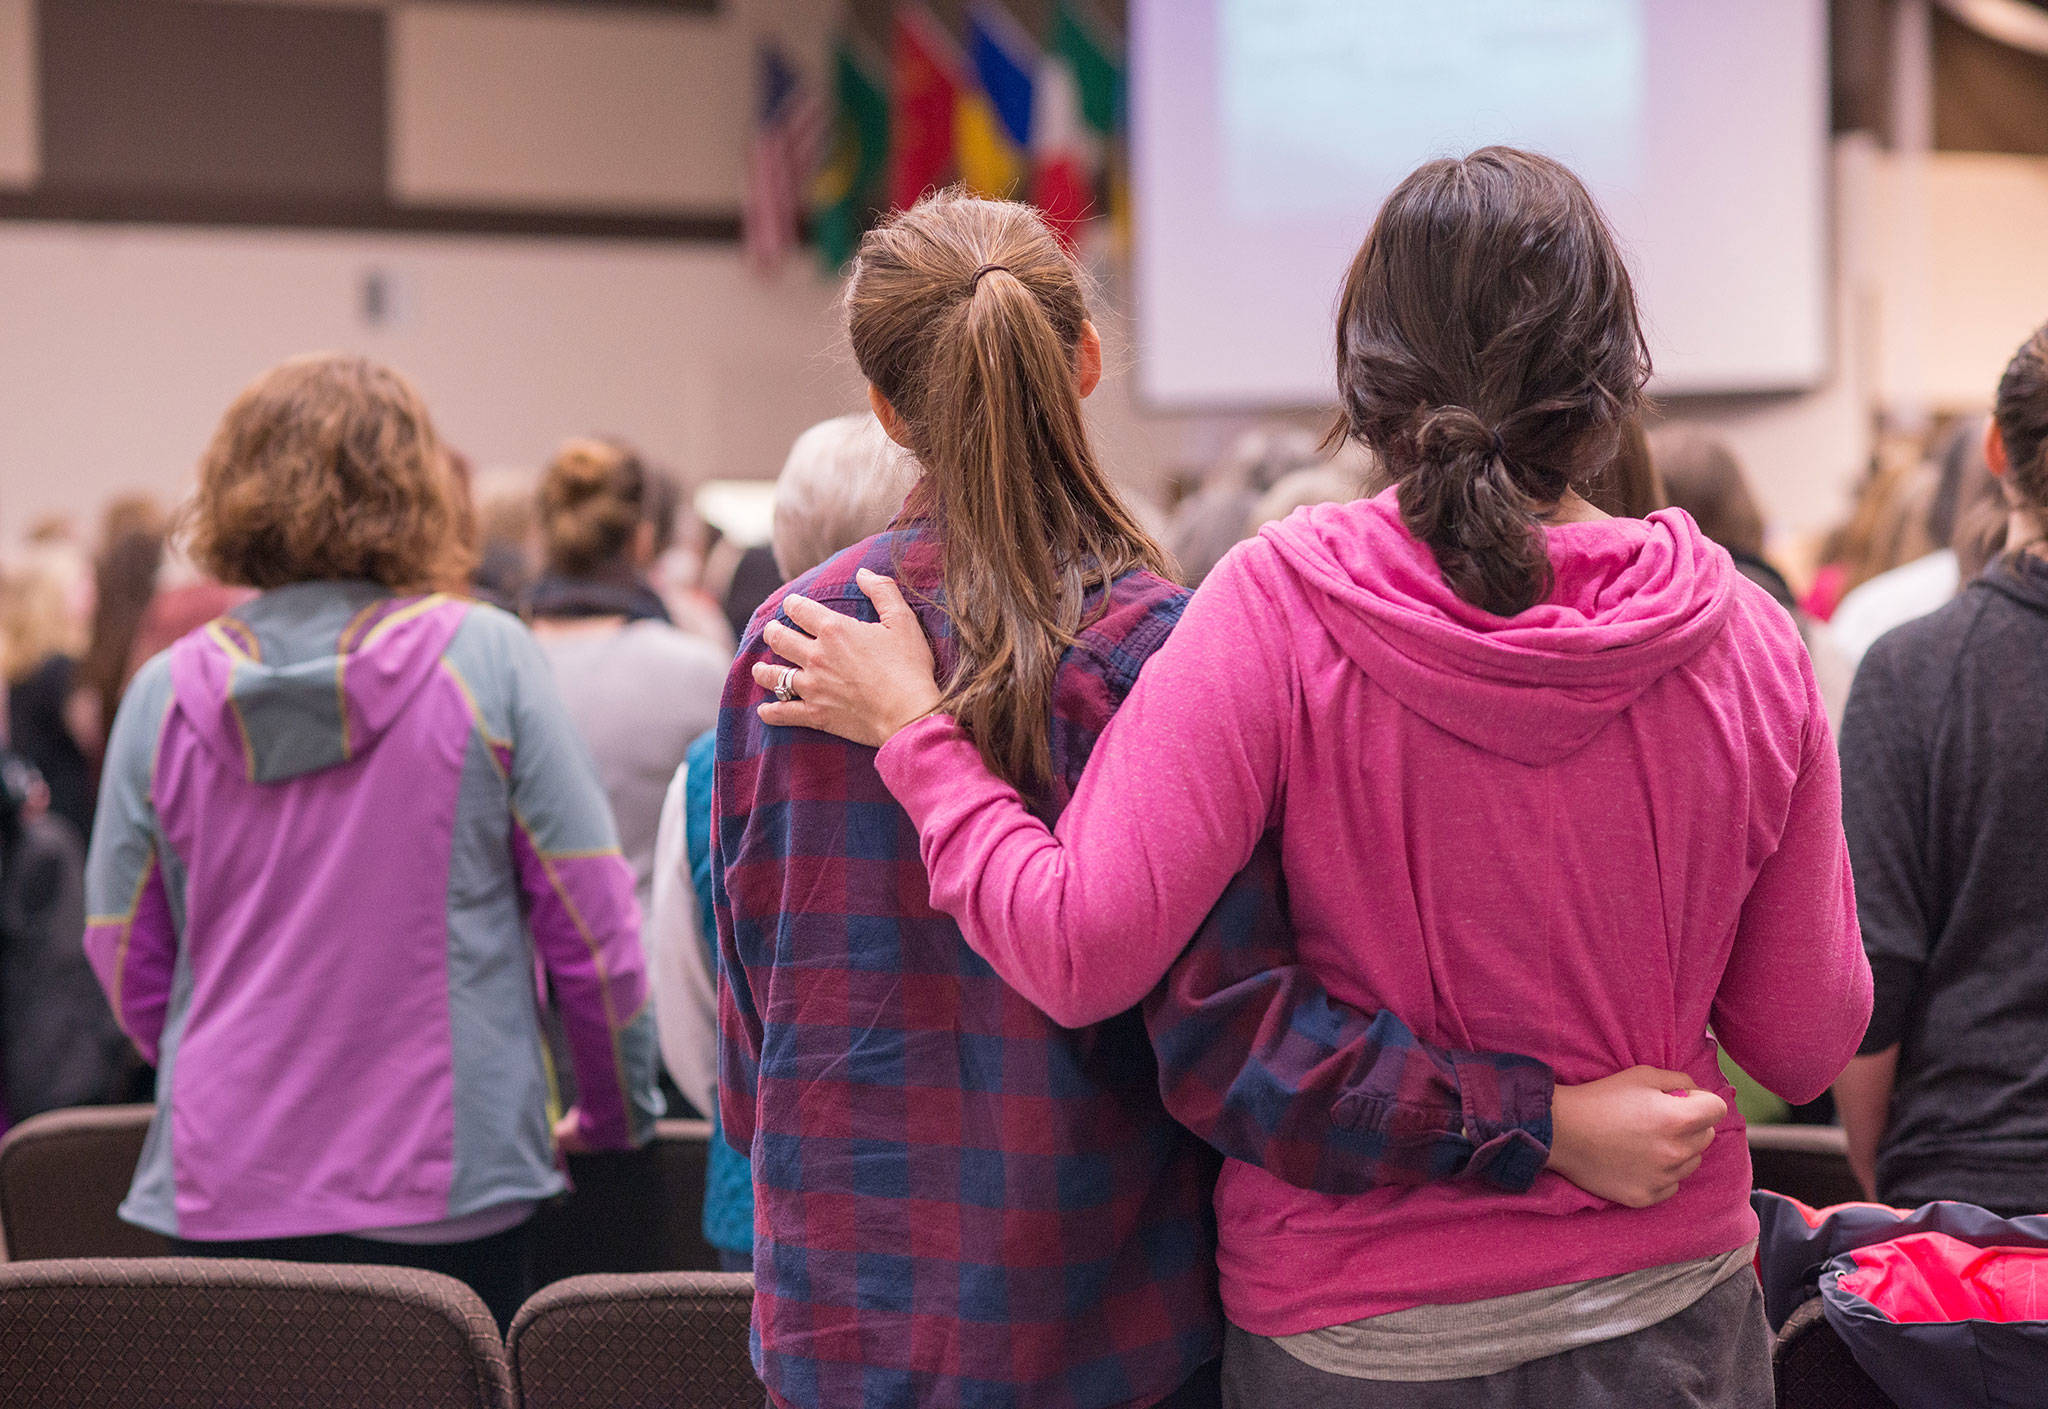 Last year, 400 women came together for the Olympic Peninsula Women’s Fellowship’s first conference at Dungeness Community Church. This year, organizers moved the event to Sequim High School to host up to 600 participants. Photo by Erin Henderson